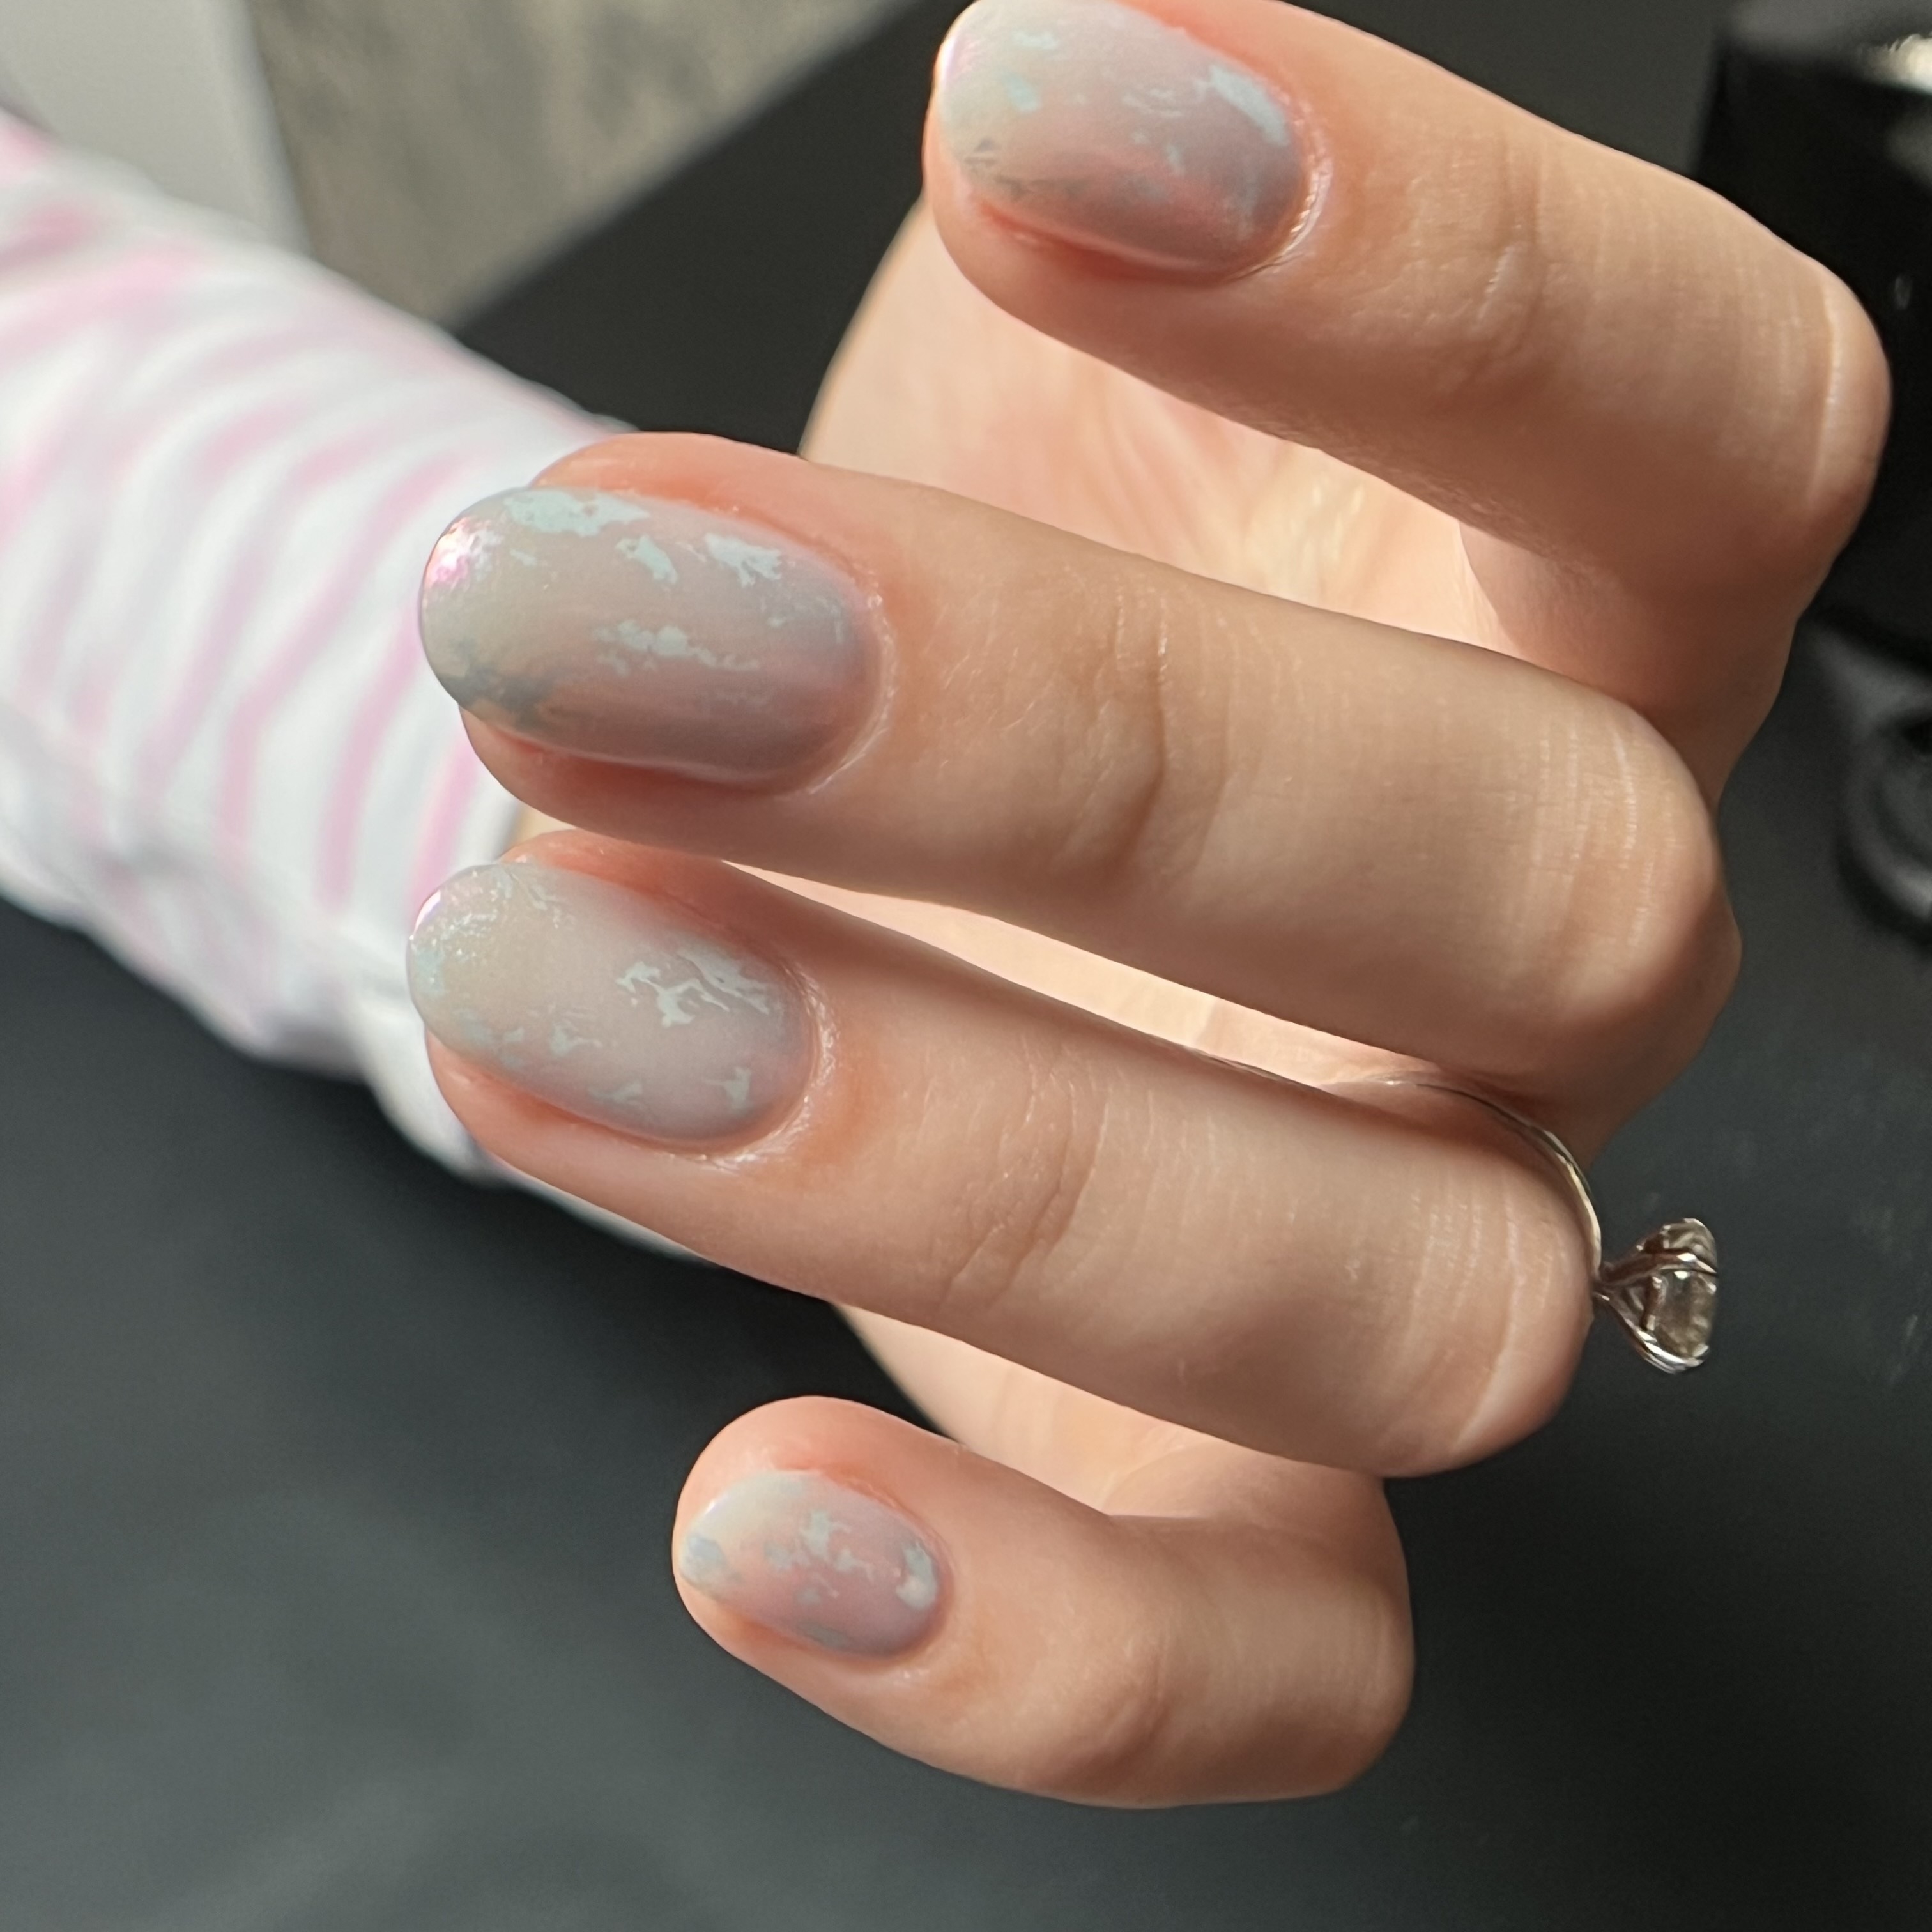 up-close photo of white nails with a design